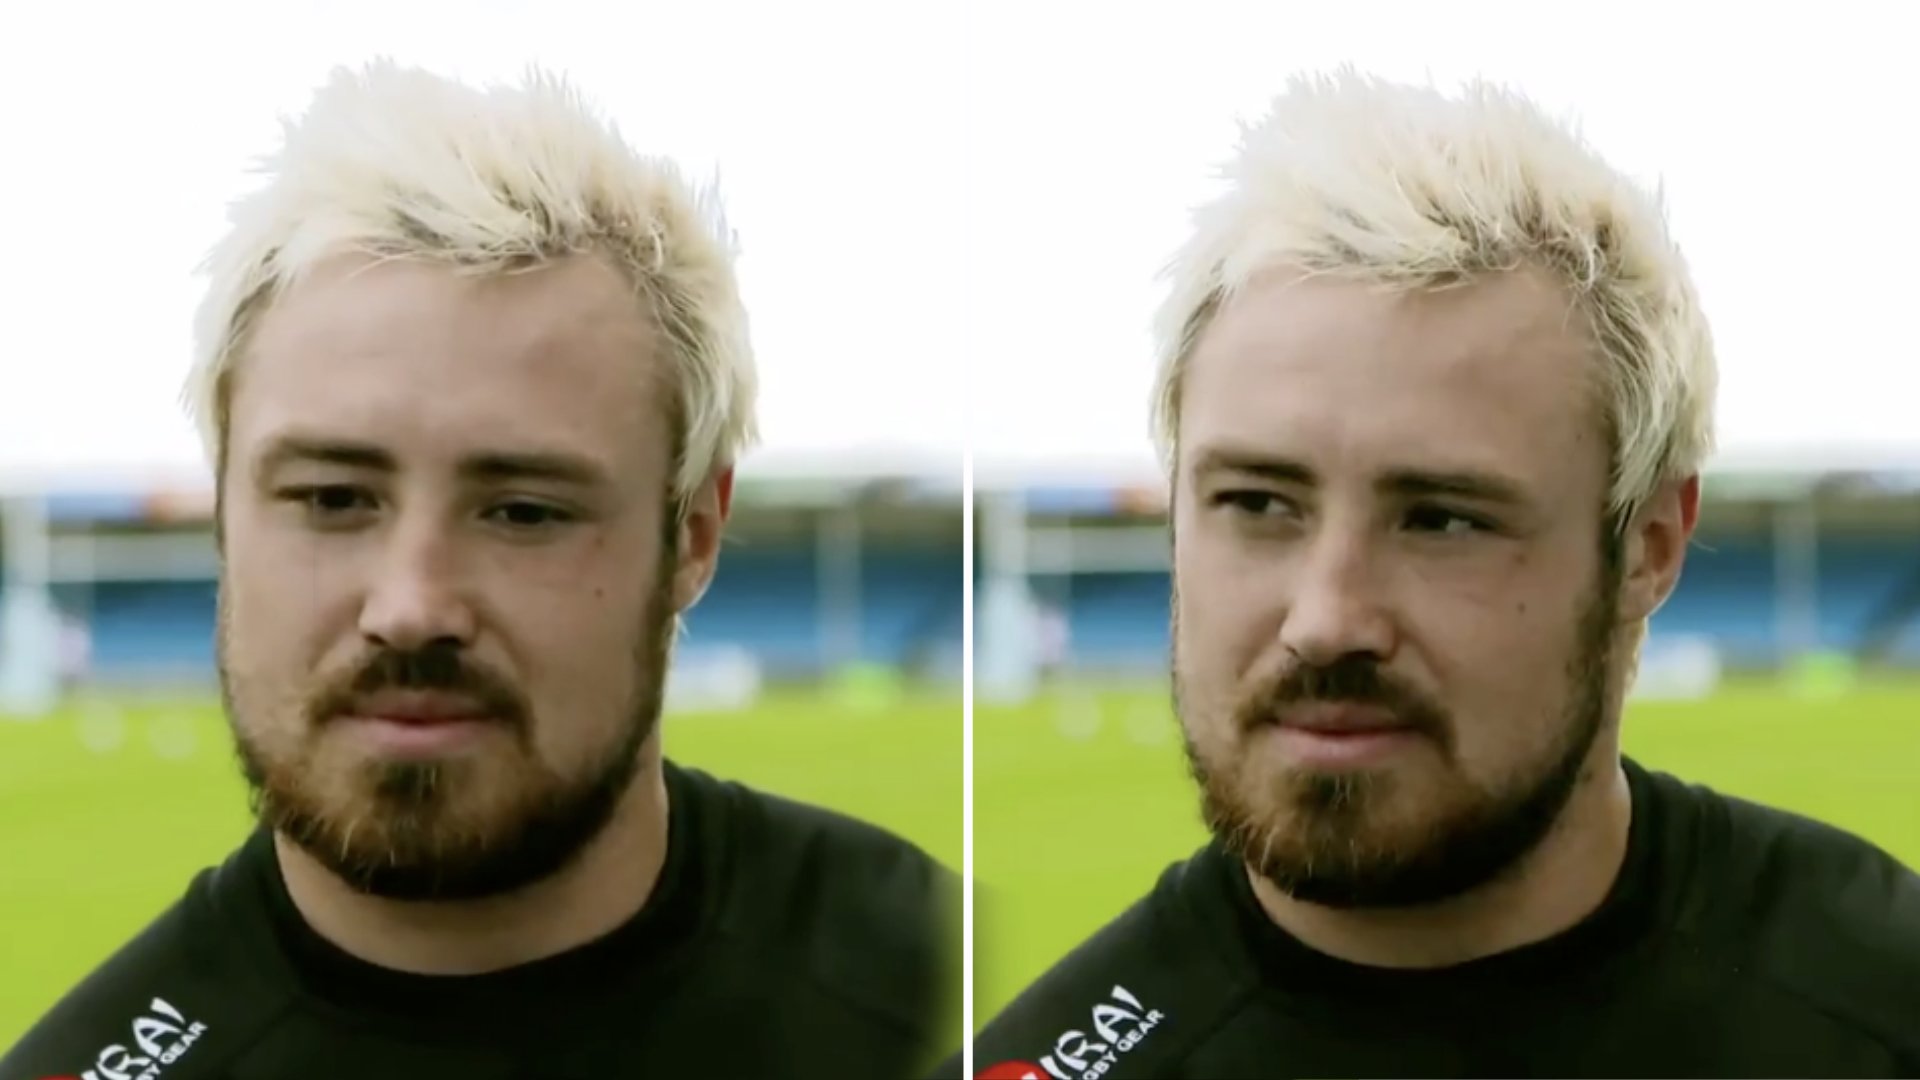 WATCH: "Look at our try highlights". - Jack Nowell on claims that Exeter are one-dimensional